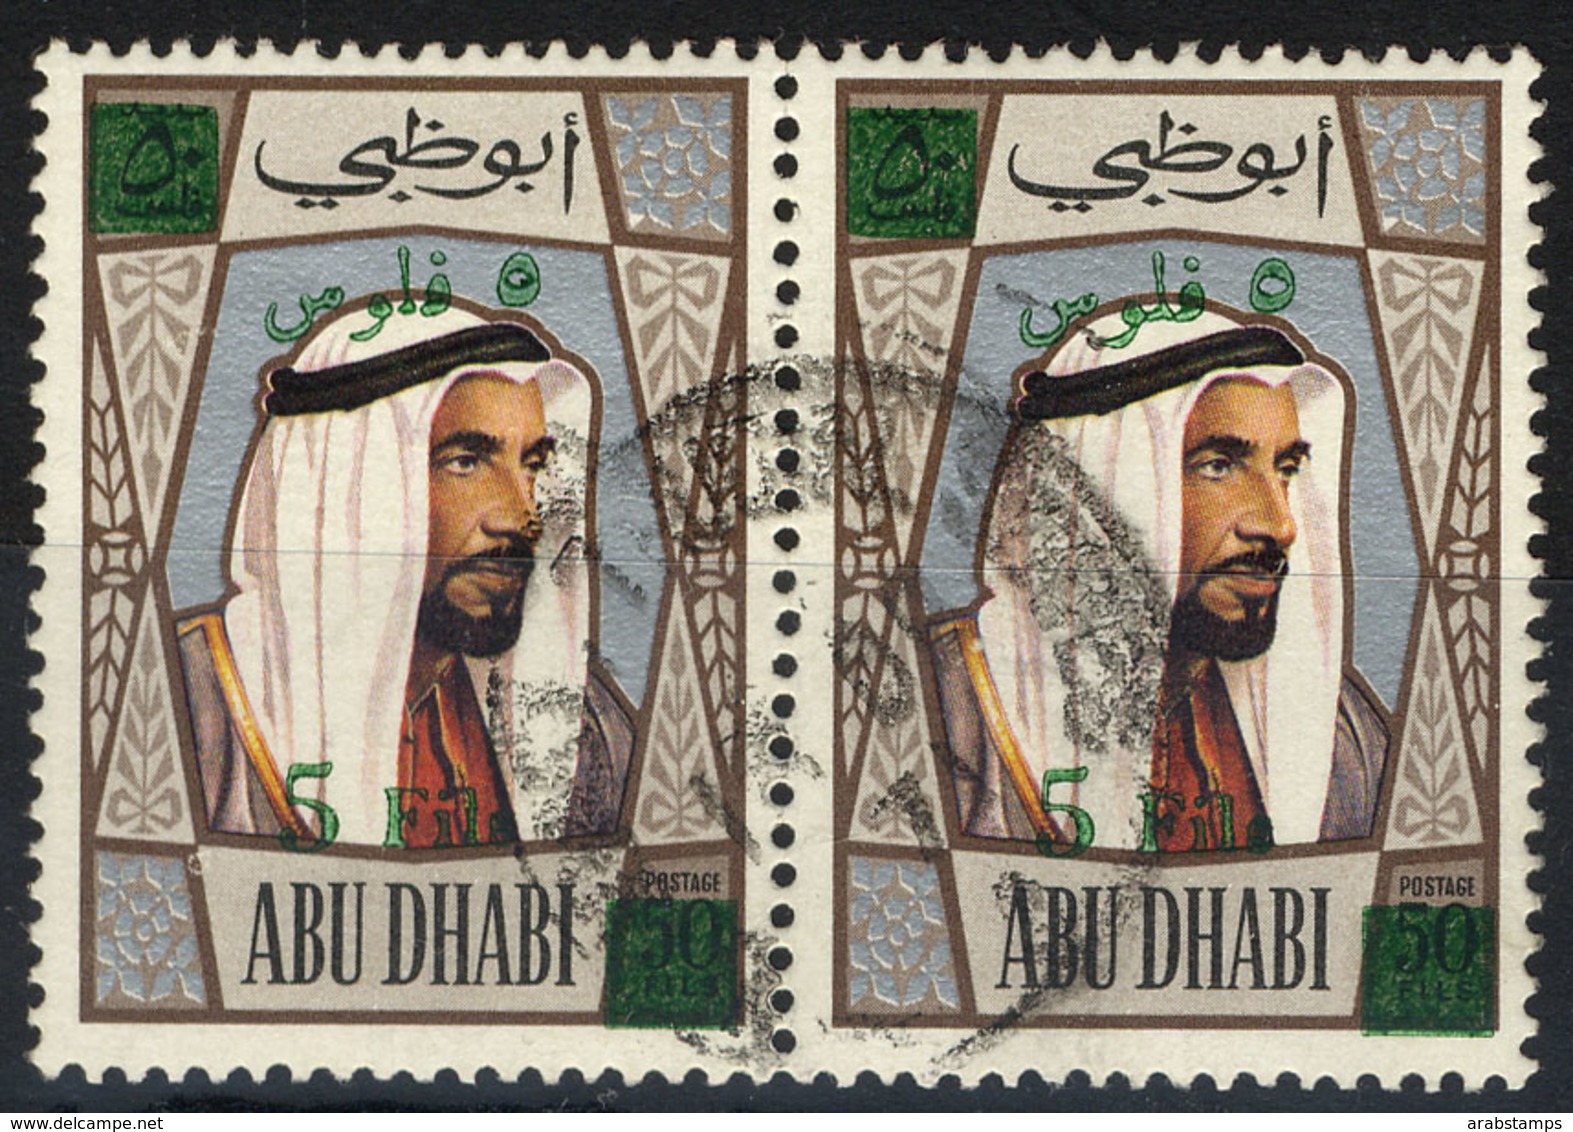 1971 ABU DHABI Sheikh ZAYED DEFINITIVES Pair 2 Stamps Overprint In 5F Used Only For10 Days - Abu Dhabi